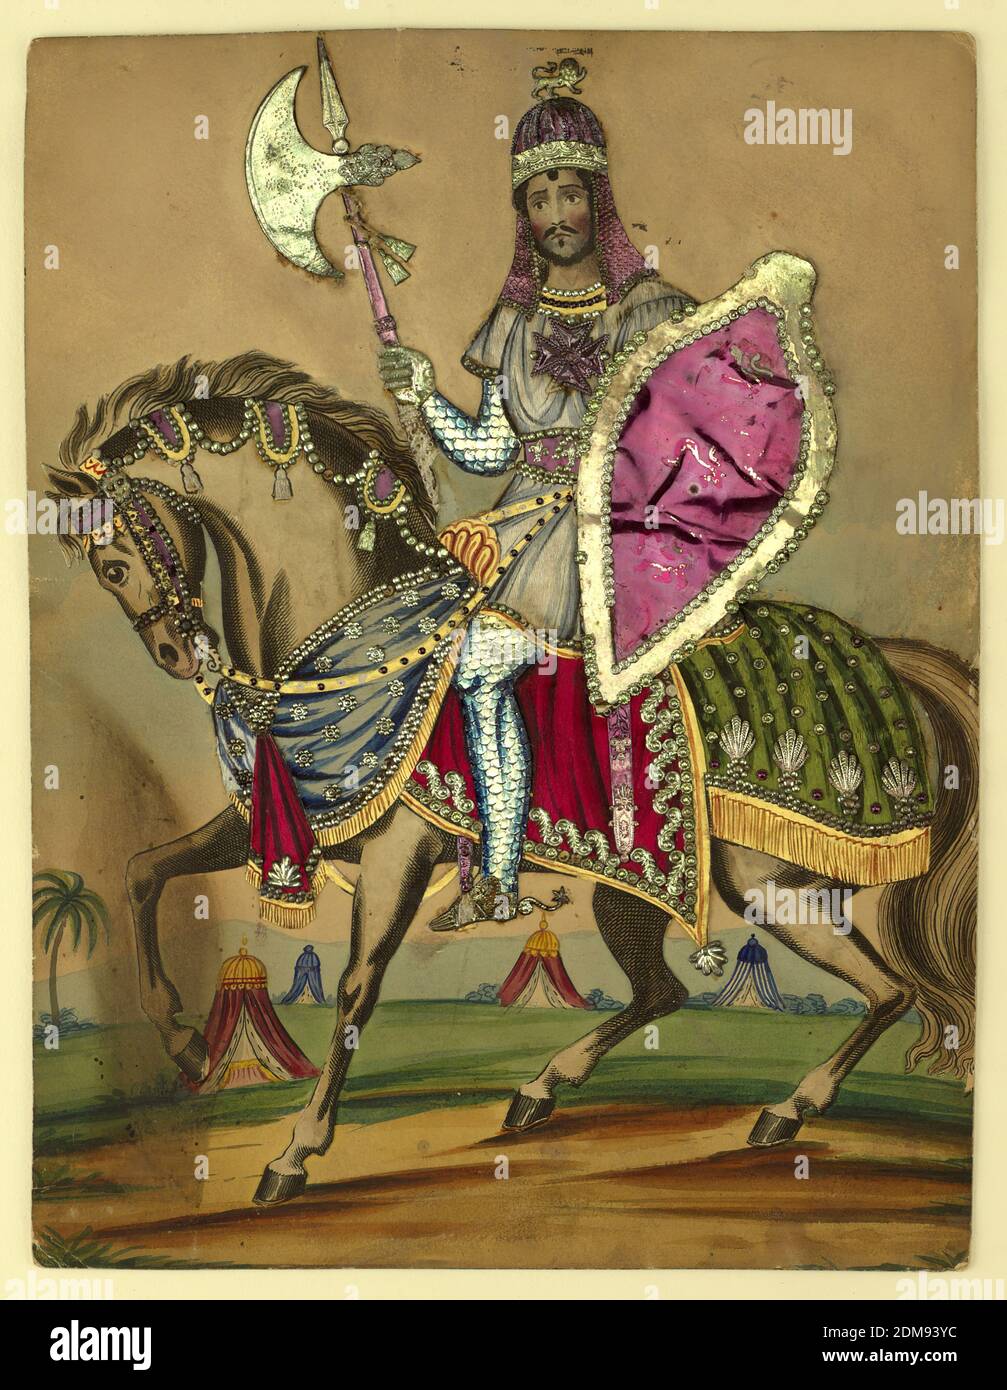 Tinsel Picture: Edmund Kean as Richard Coeur de Lion, Hand-colored engraving, embossed foil, fabric on paper, The actor, Edmun Kean, is shown on horseback, clad in armour. The horse and actor's face are engravings, cut out, the trappings silk and embossed metal and paper, and the background, shown an encampment, an original drawing., England, England, Europe, 1830–1840, Picture, Picture Stock Photo